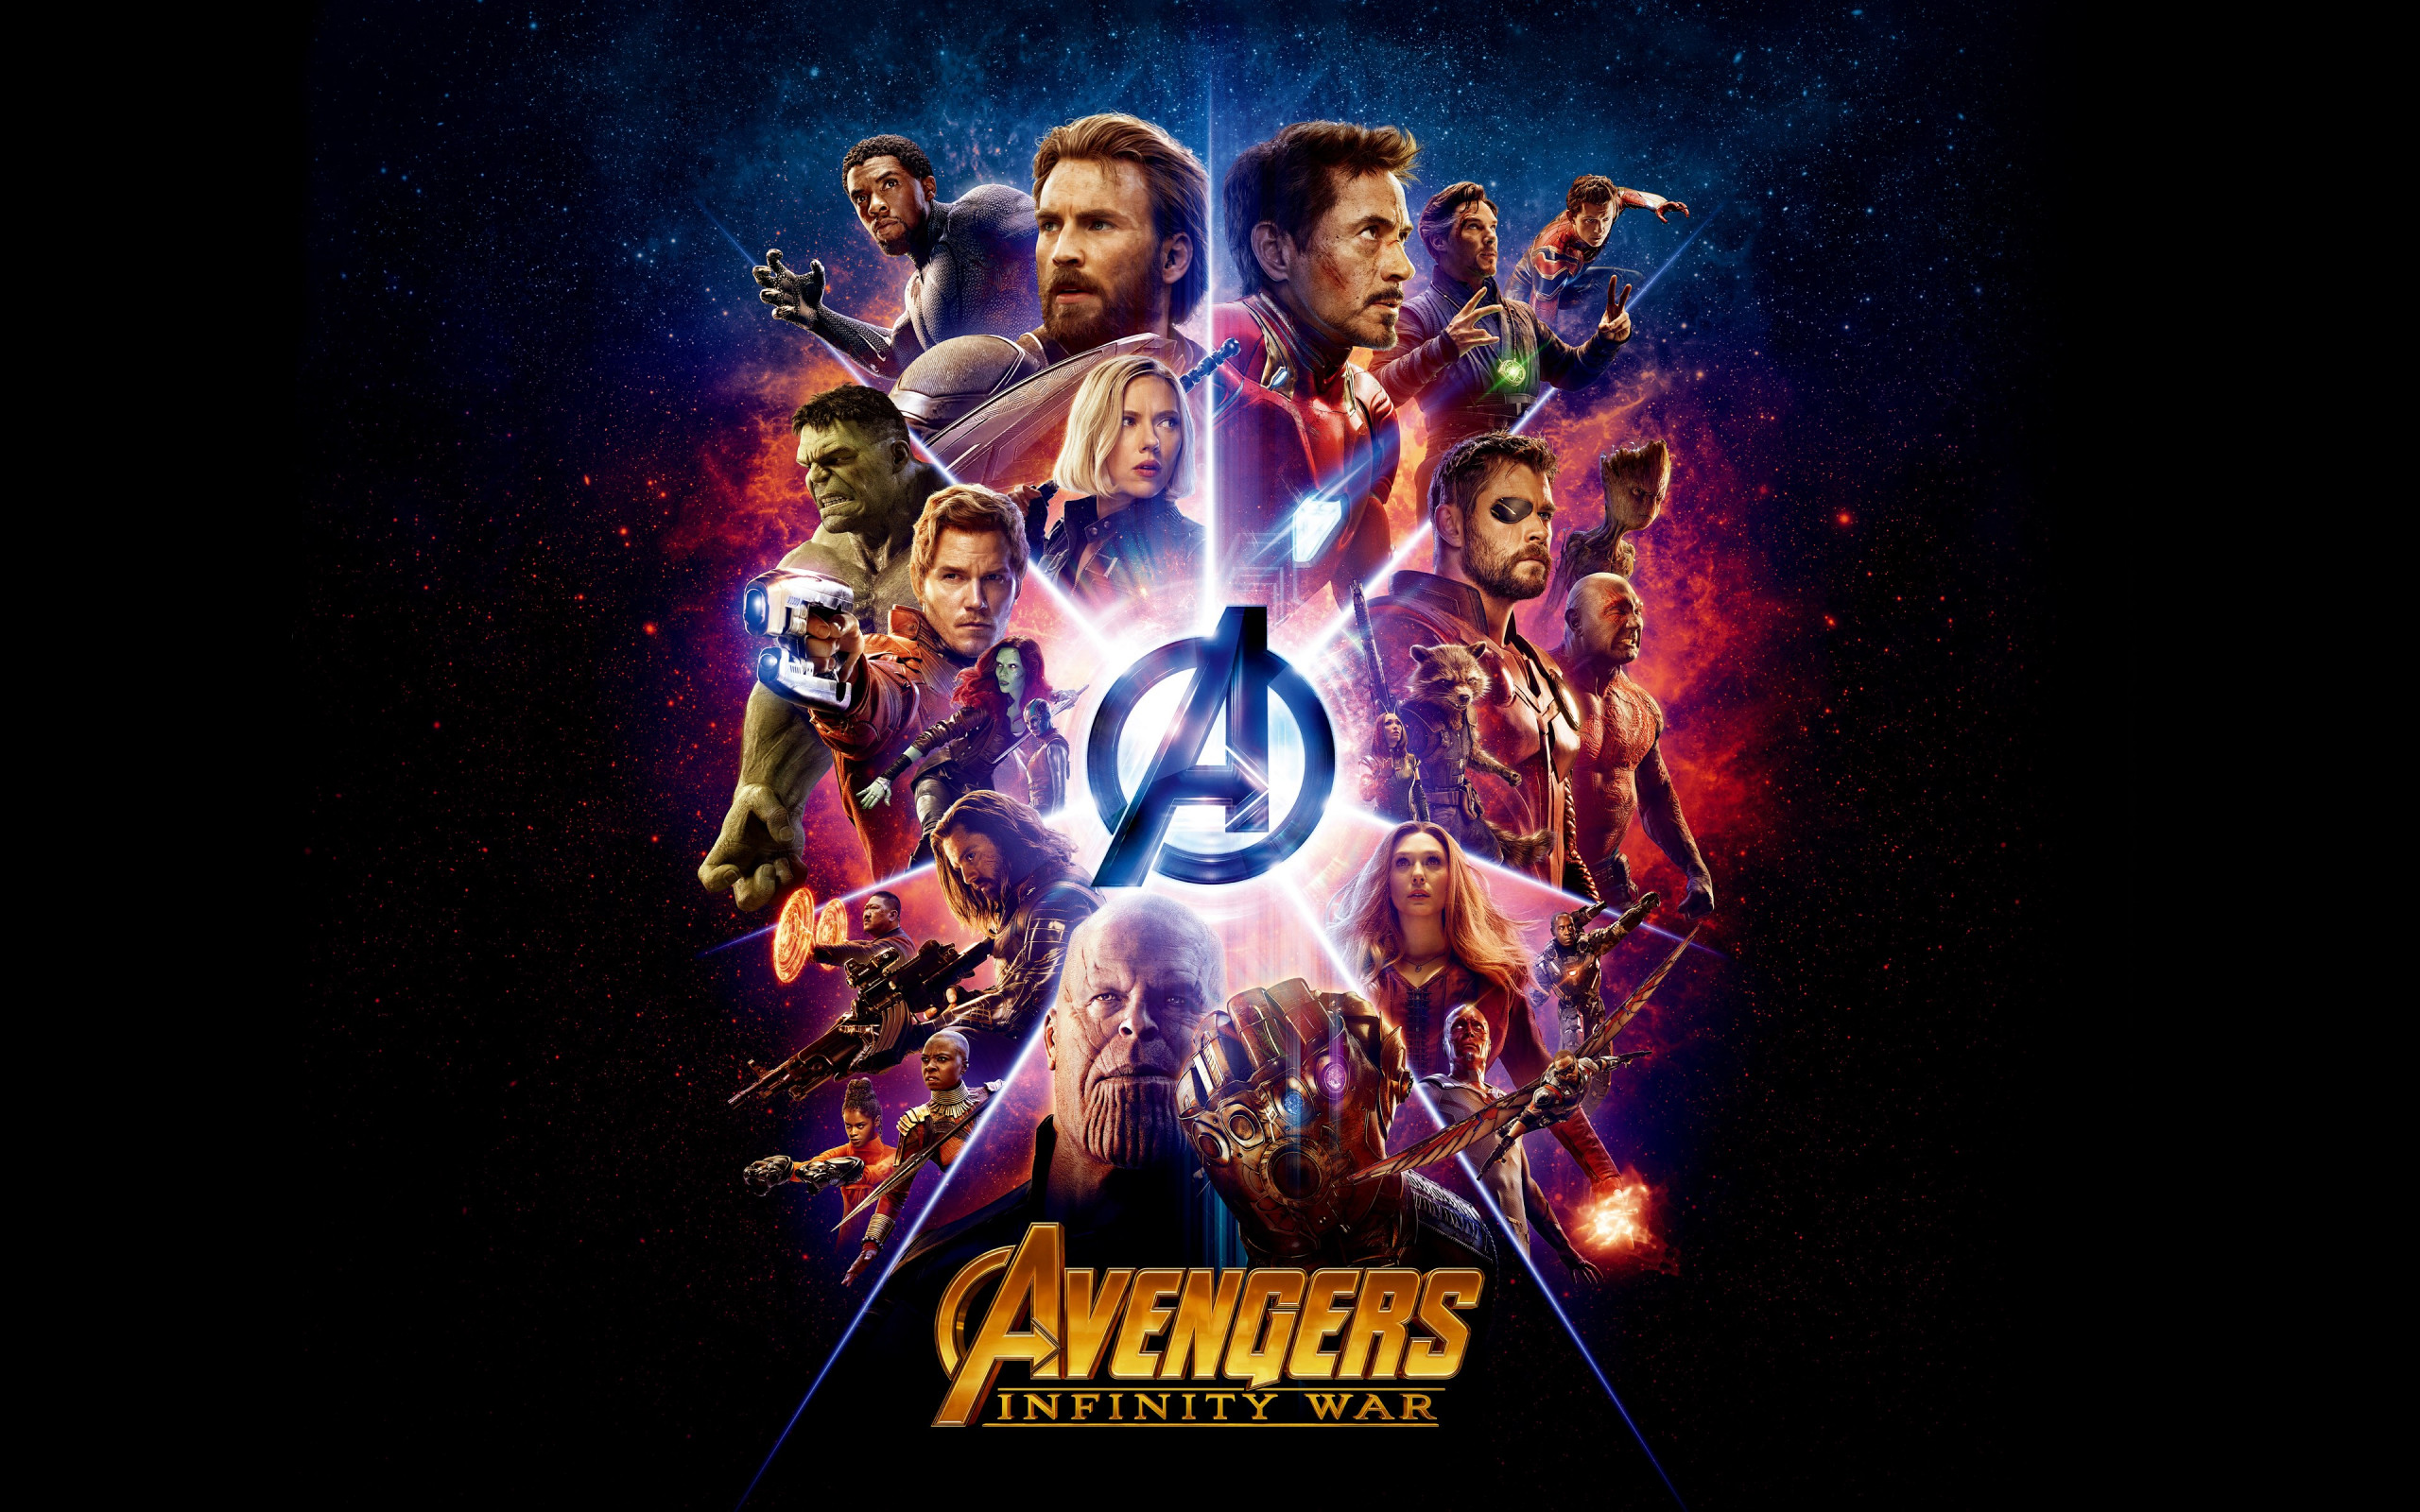 All the heroes from Avengers: Infinity War wallpaper 2560x1600